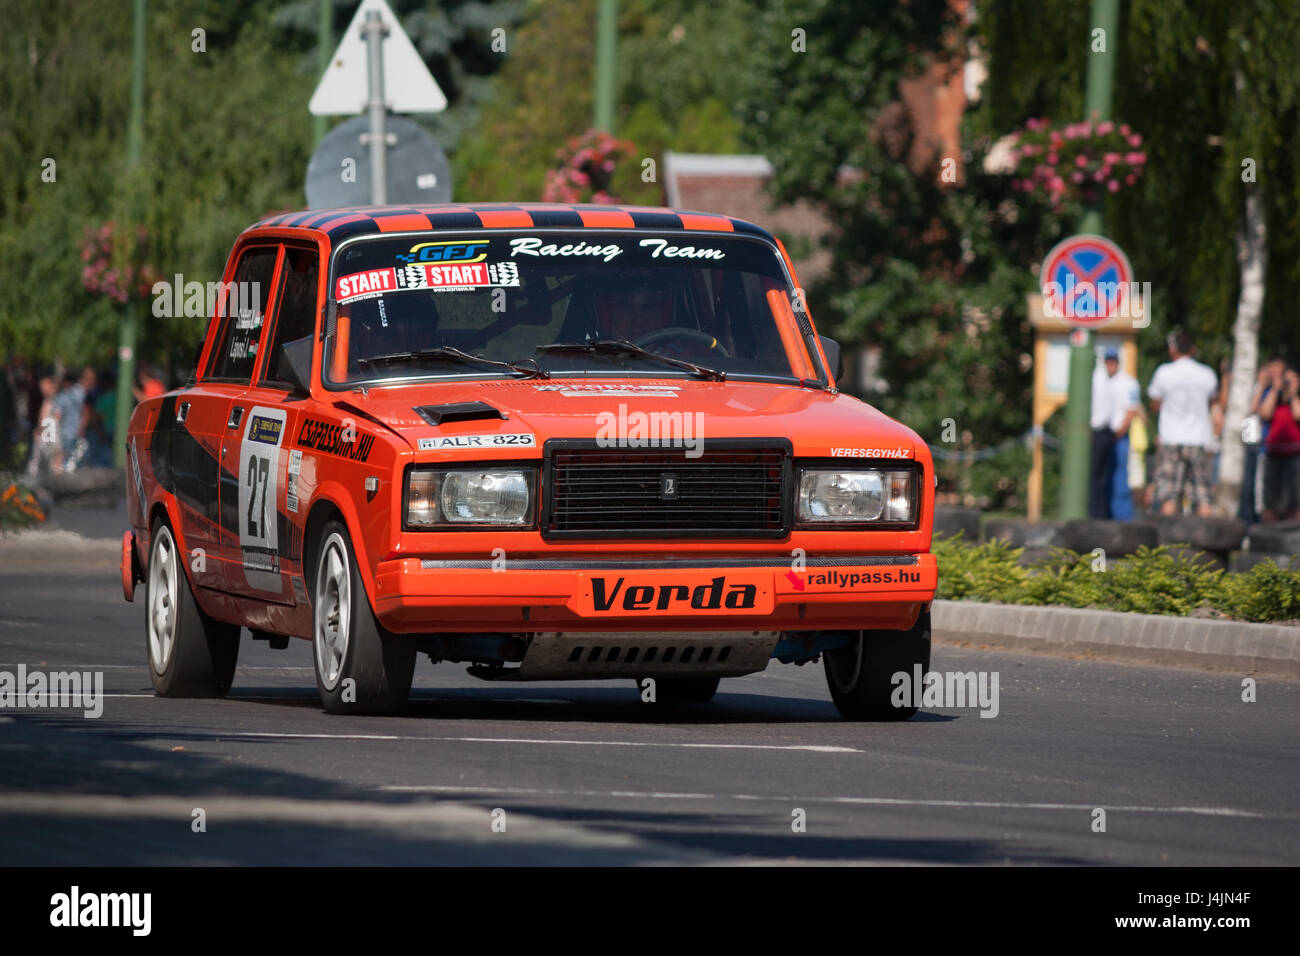 TOTKOMLOS, HUNGARY - JUNE 12, 2011: Lajos Szekely (driver) and Jozsef Laposi (co-driver) in their Lada (VAZ) 2107 at the II. Totkomlos Rally on June 1 Stock Photo